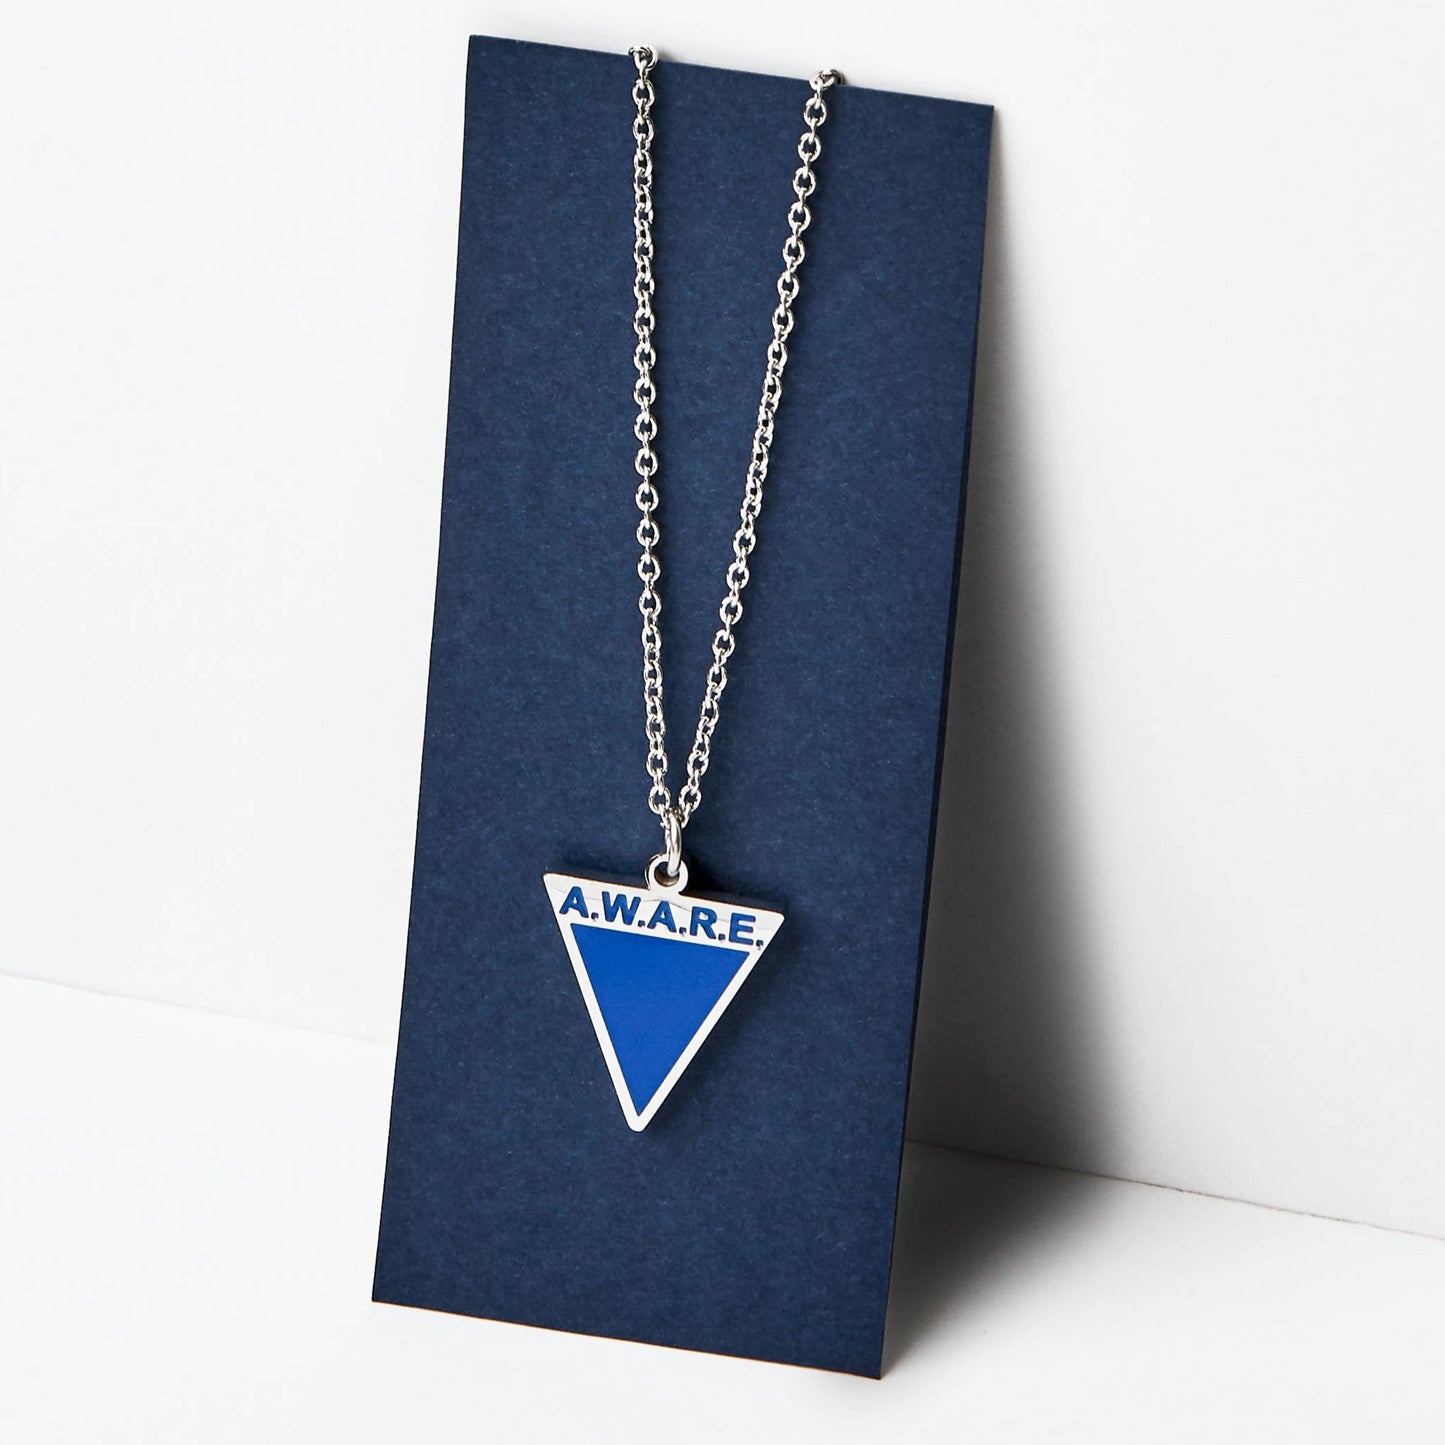 Blue AWARE Necklaces